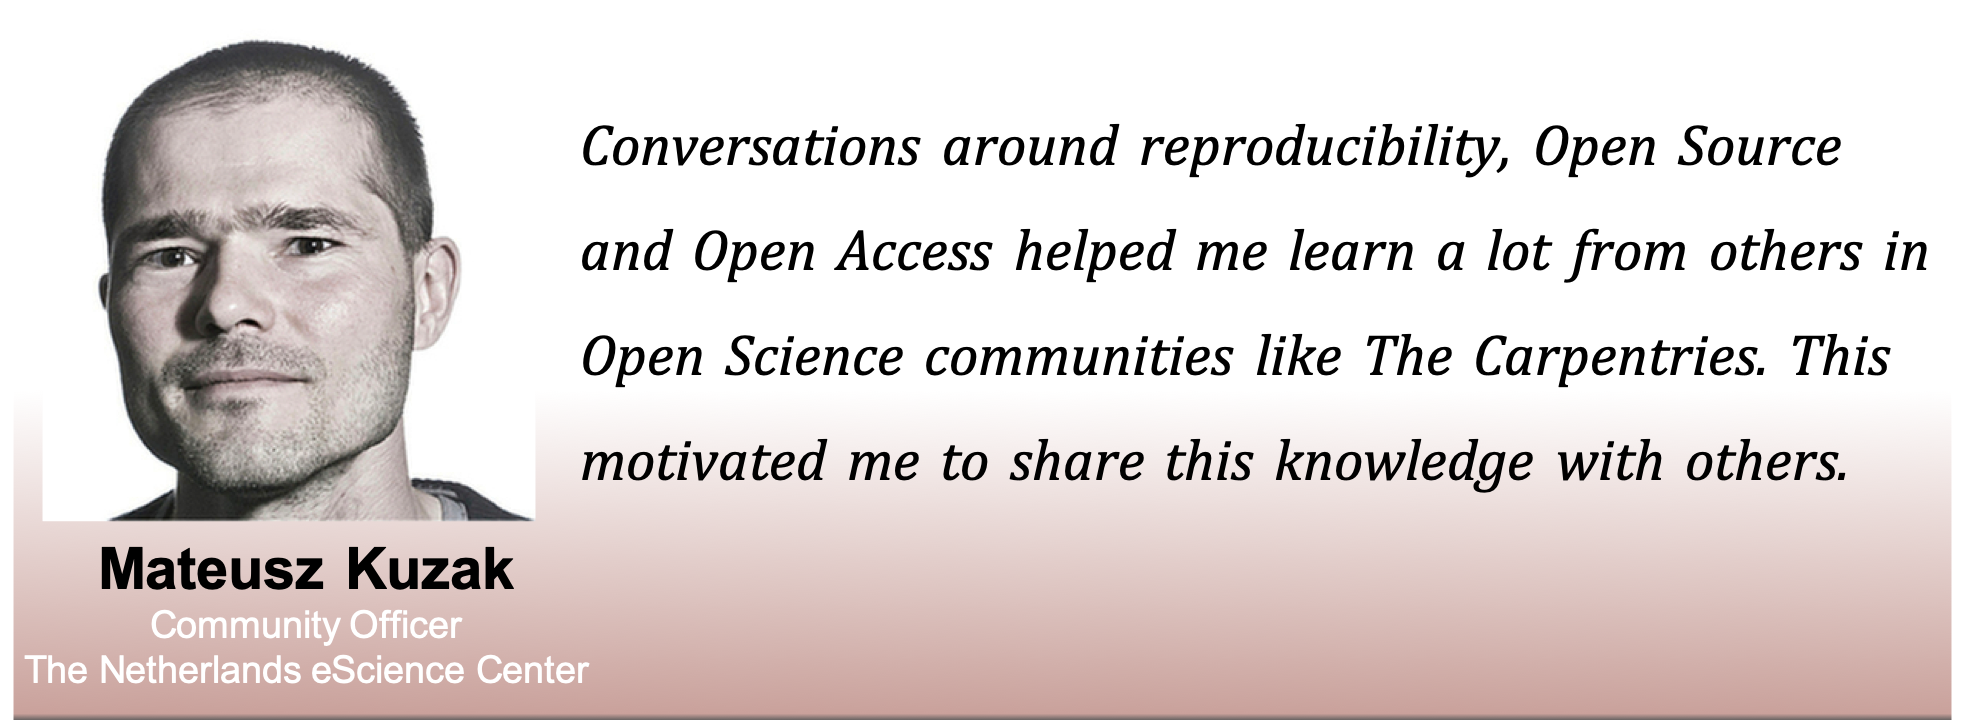 Picture of Mateusz with the caption: Conversations around reproducibility, open source, and open access helped me learn a lot from others in open science communities like The Carpentries. This motivated me to share this knowledge with others.